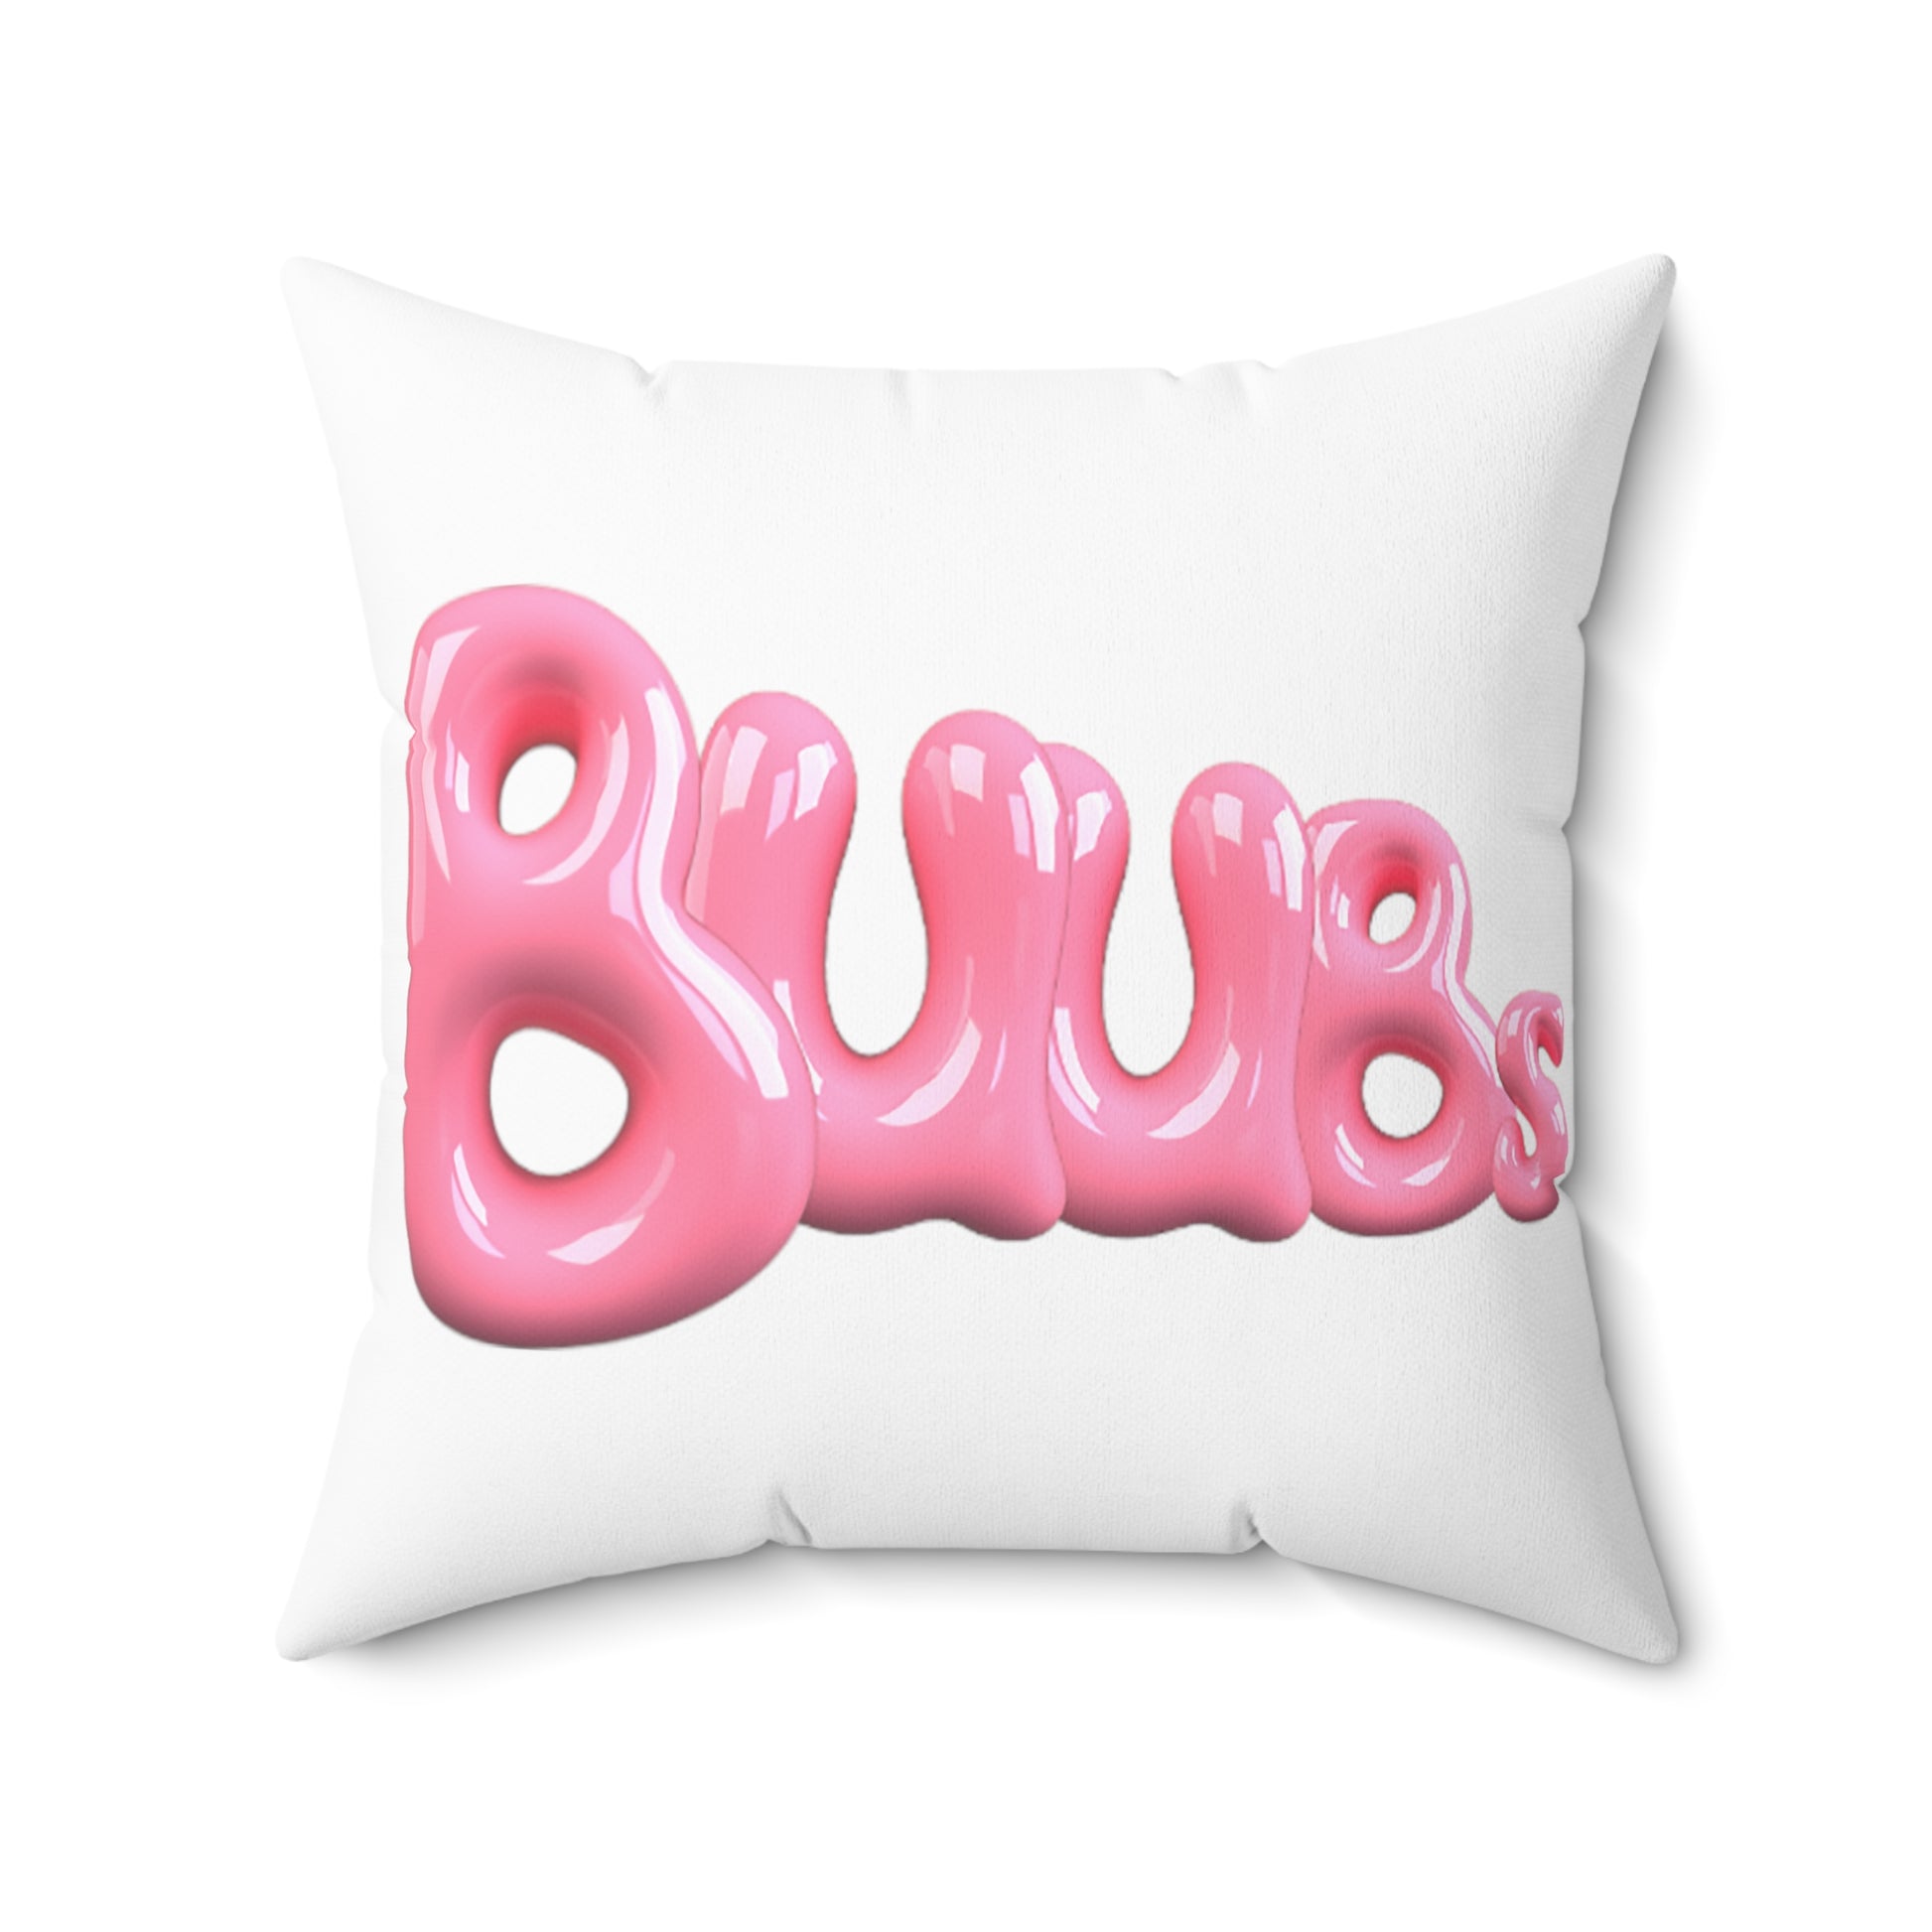 Buubs Spun Polyester Square Pillow - BuuBs